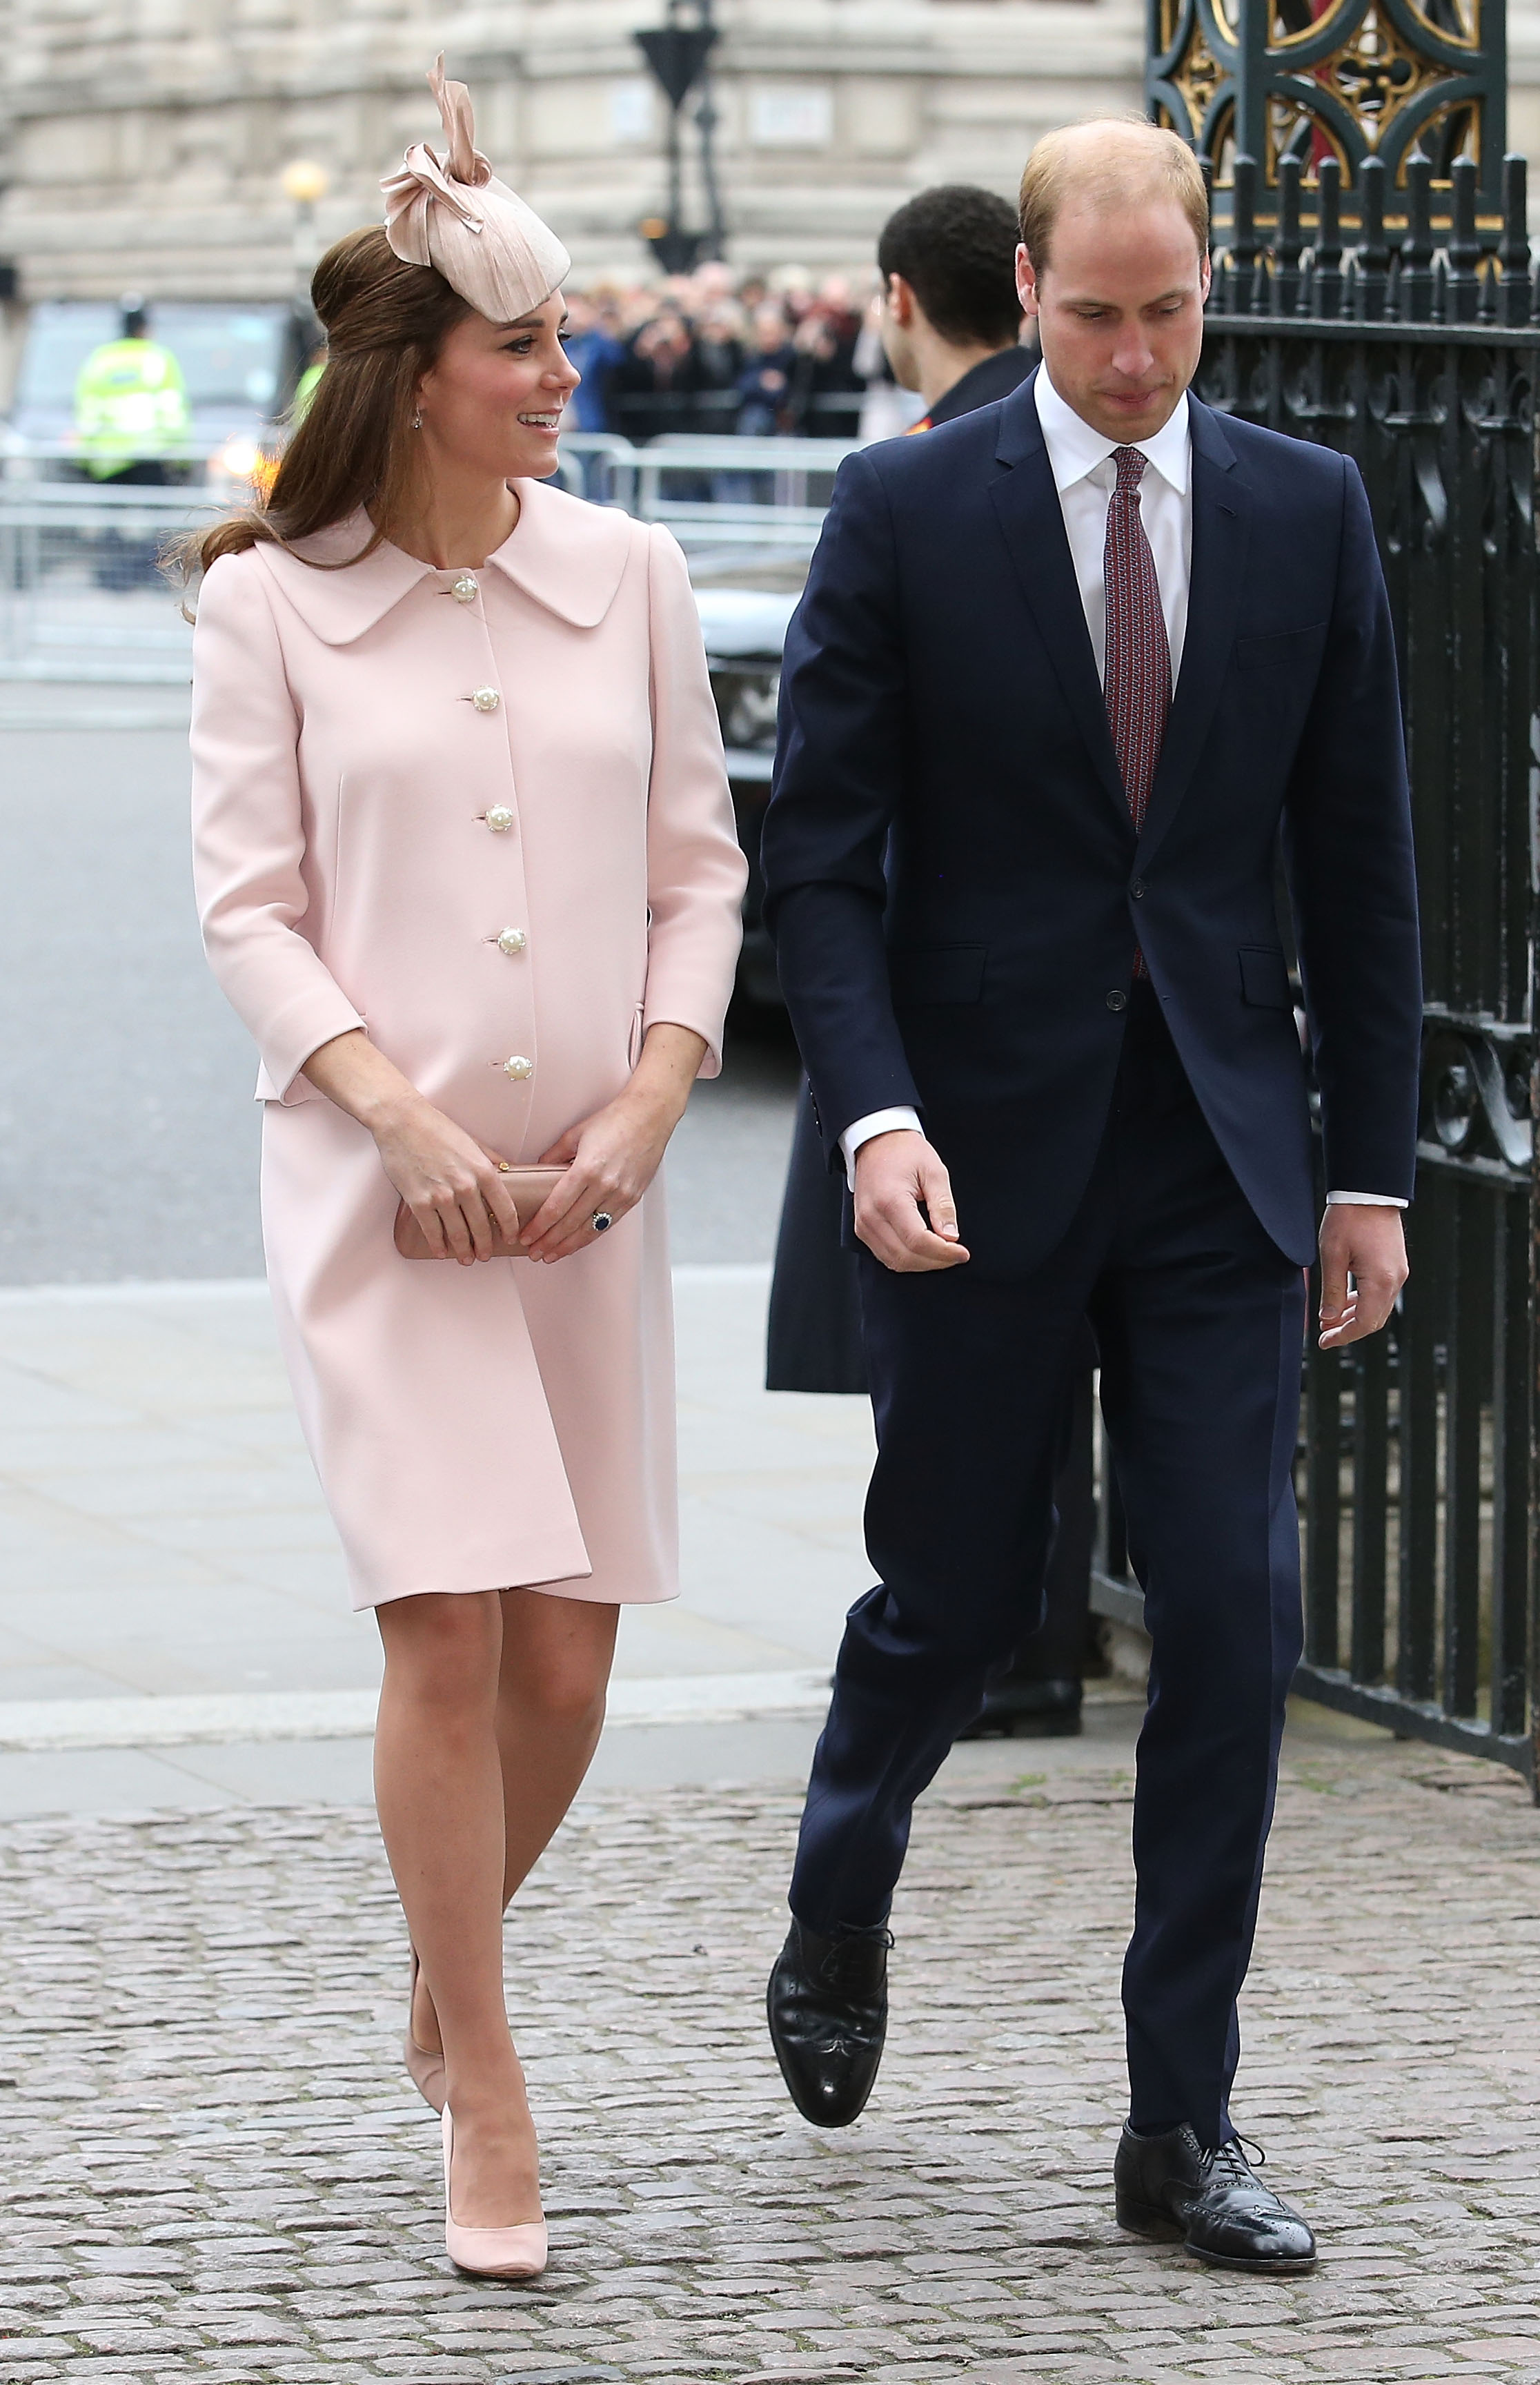 LONDON, ENGLAND - MARCH 09: Catherine, Duchess of Cambridge and Prince William, Duke of Cambridge attend the Observance for Commonwealth Day Service At Westminster Abbey on March 9, 2015 in London, England. (Photo by Chris Jackson/Getty Images)